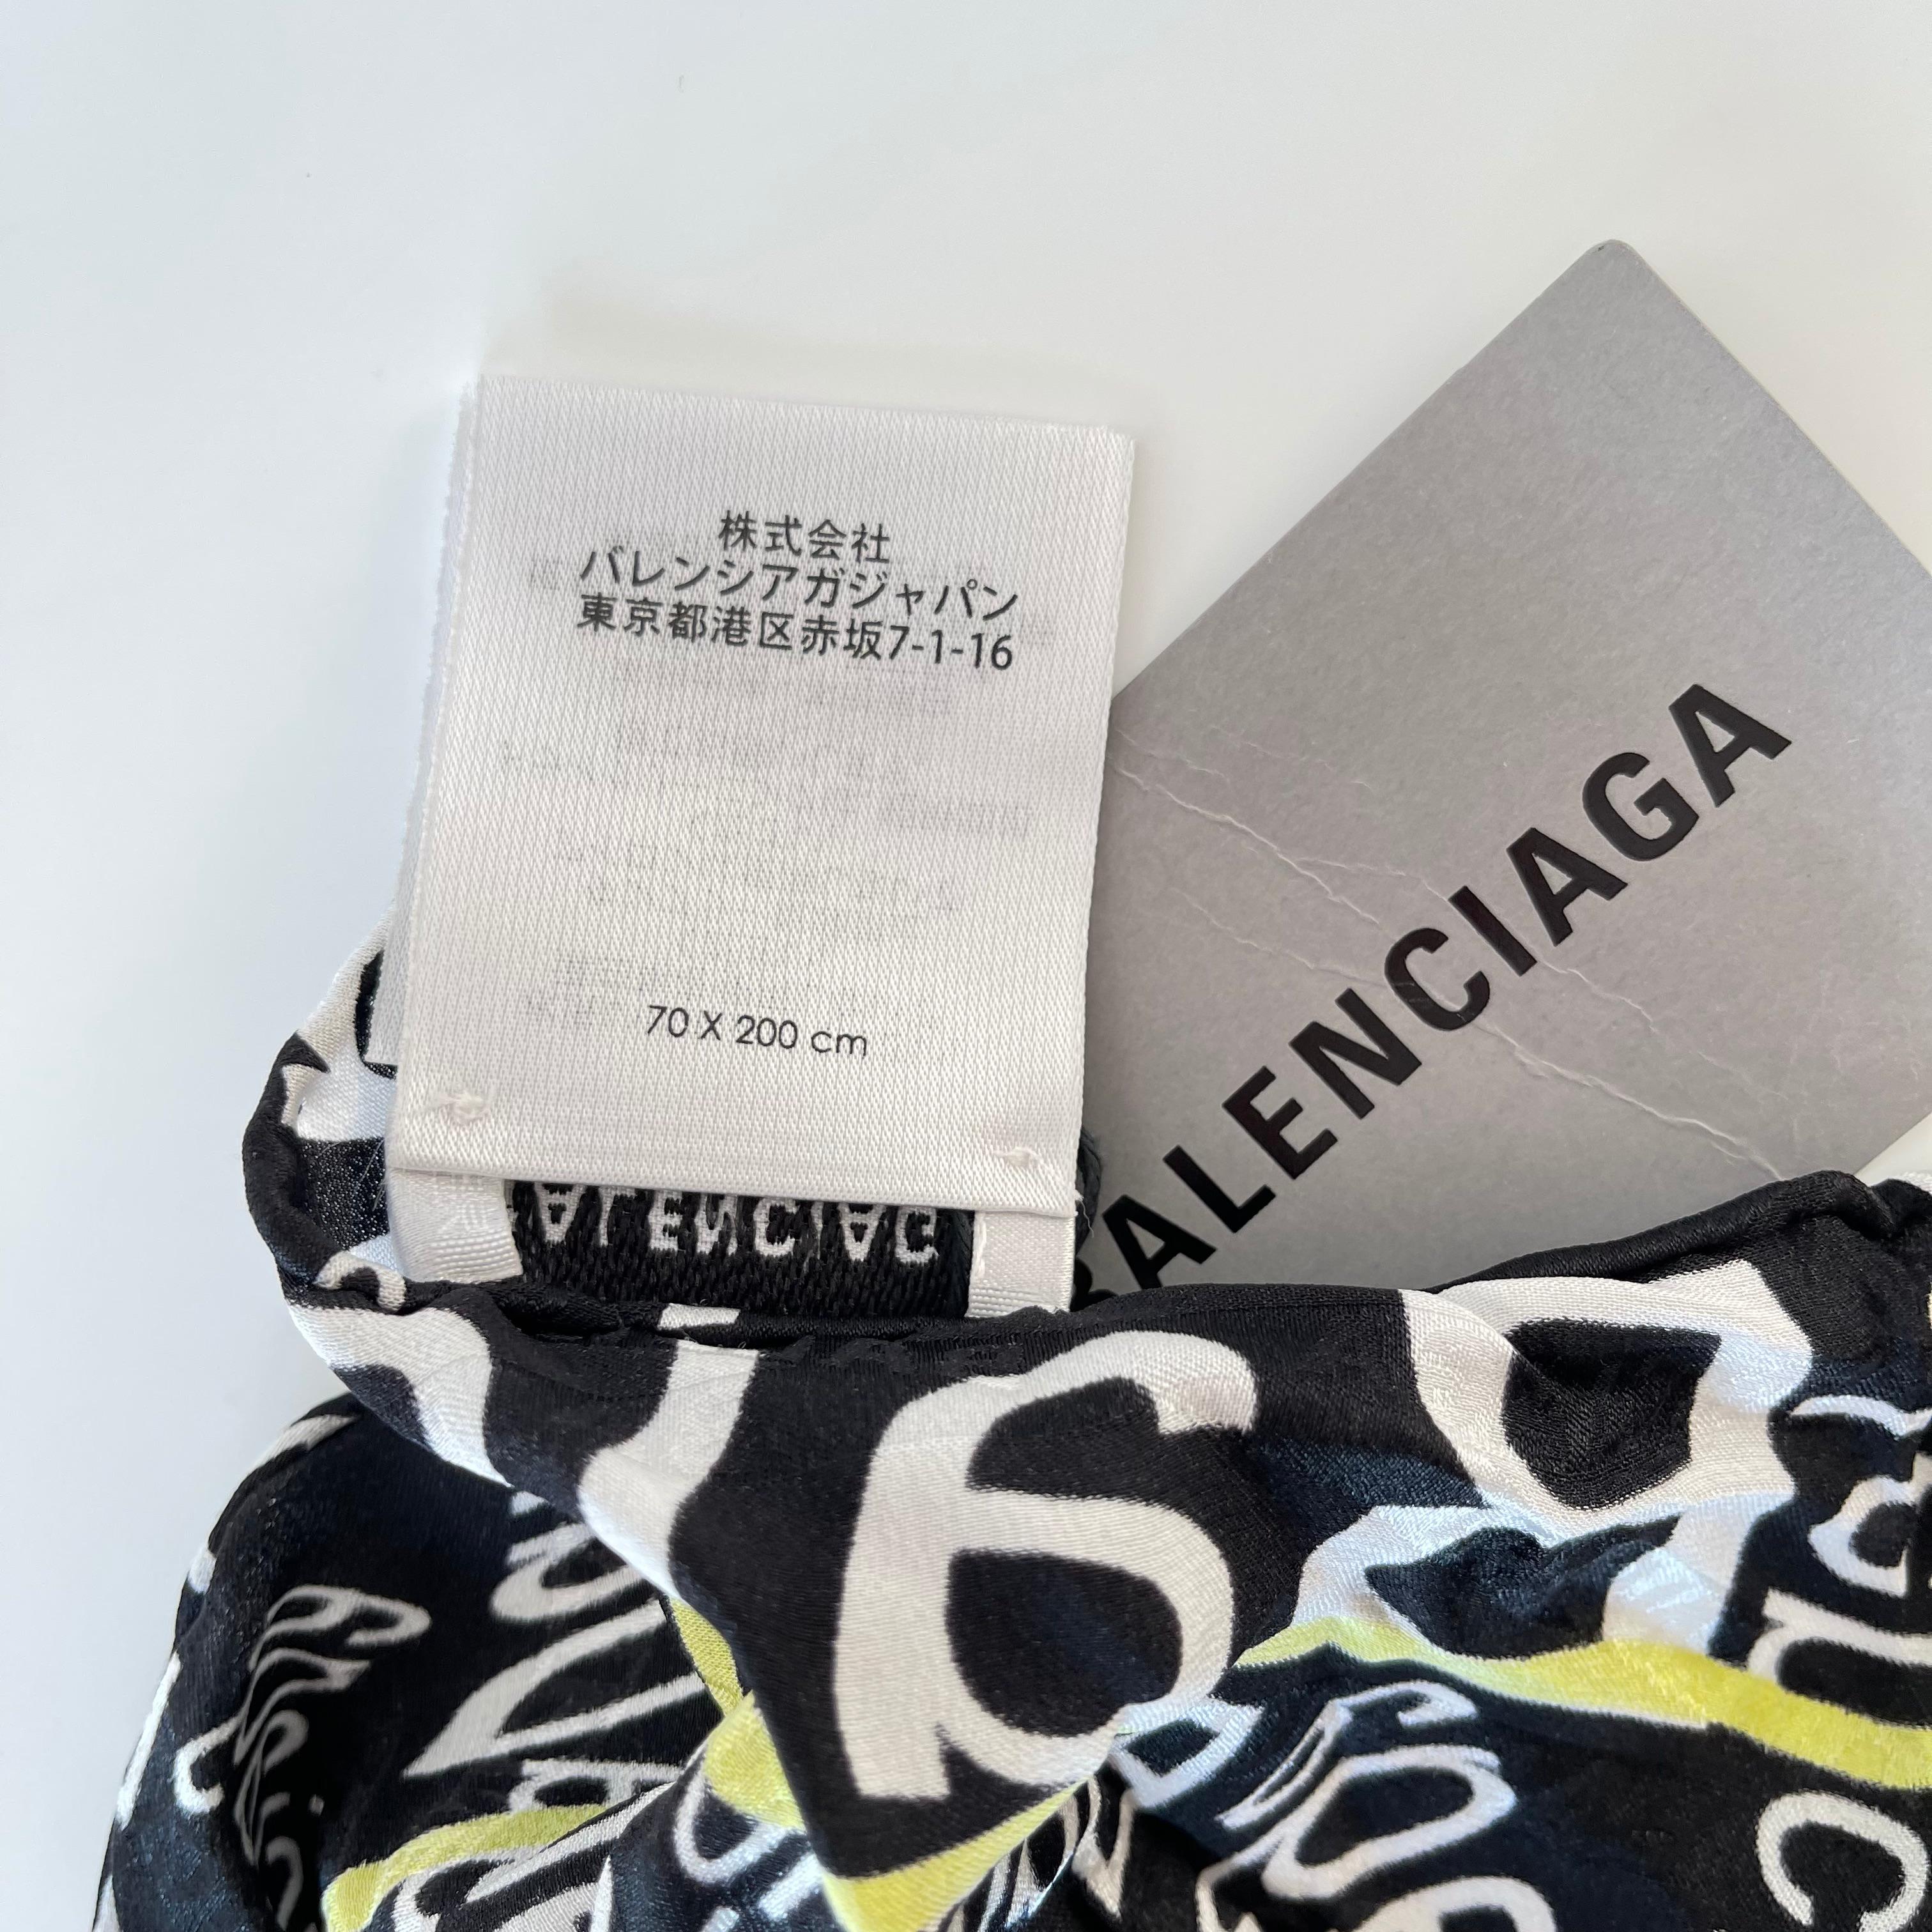 Balenciaga Curved Logo Typo Cropped Black Scarf Foulards Neckerchief (576157) In Excellent Condition For Sale In Montreal, Quebec